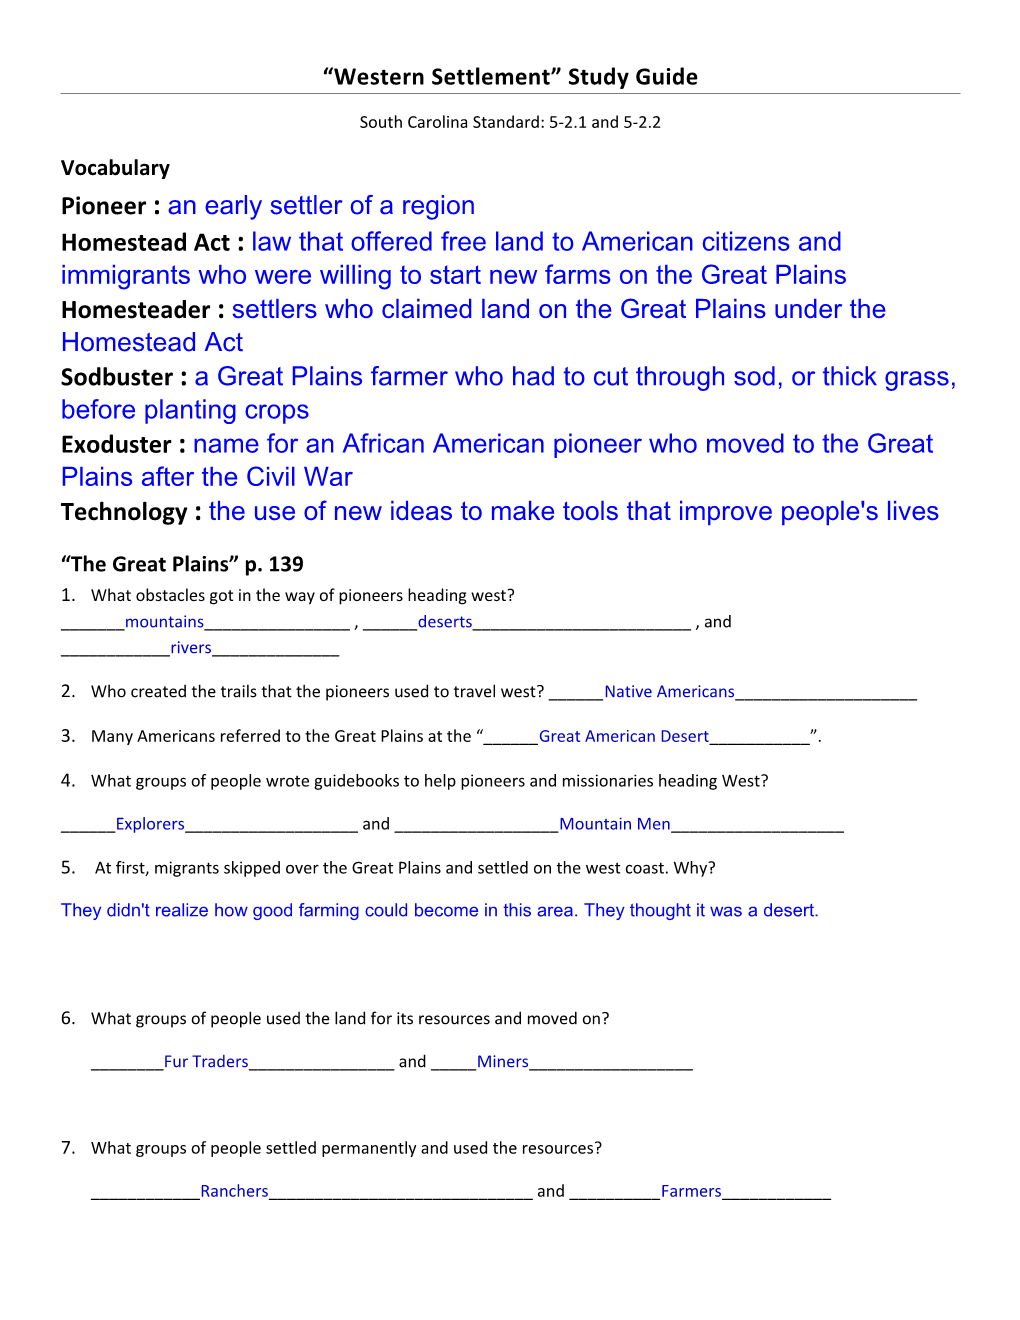 Chapter 3 Lesson 2: Pioneers of the Plains Study Guide